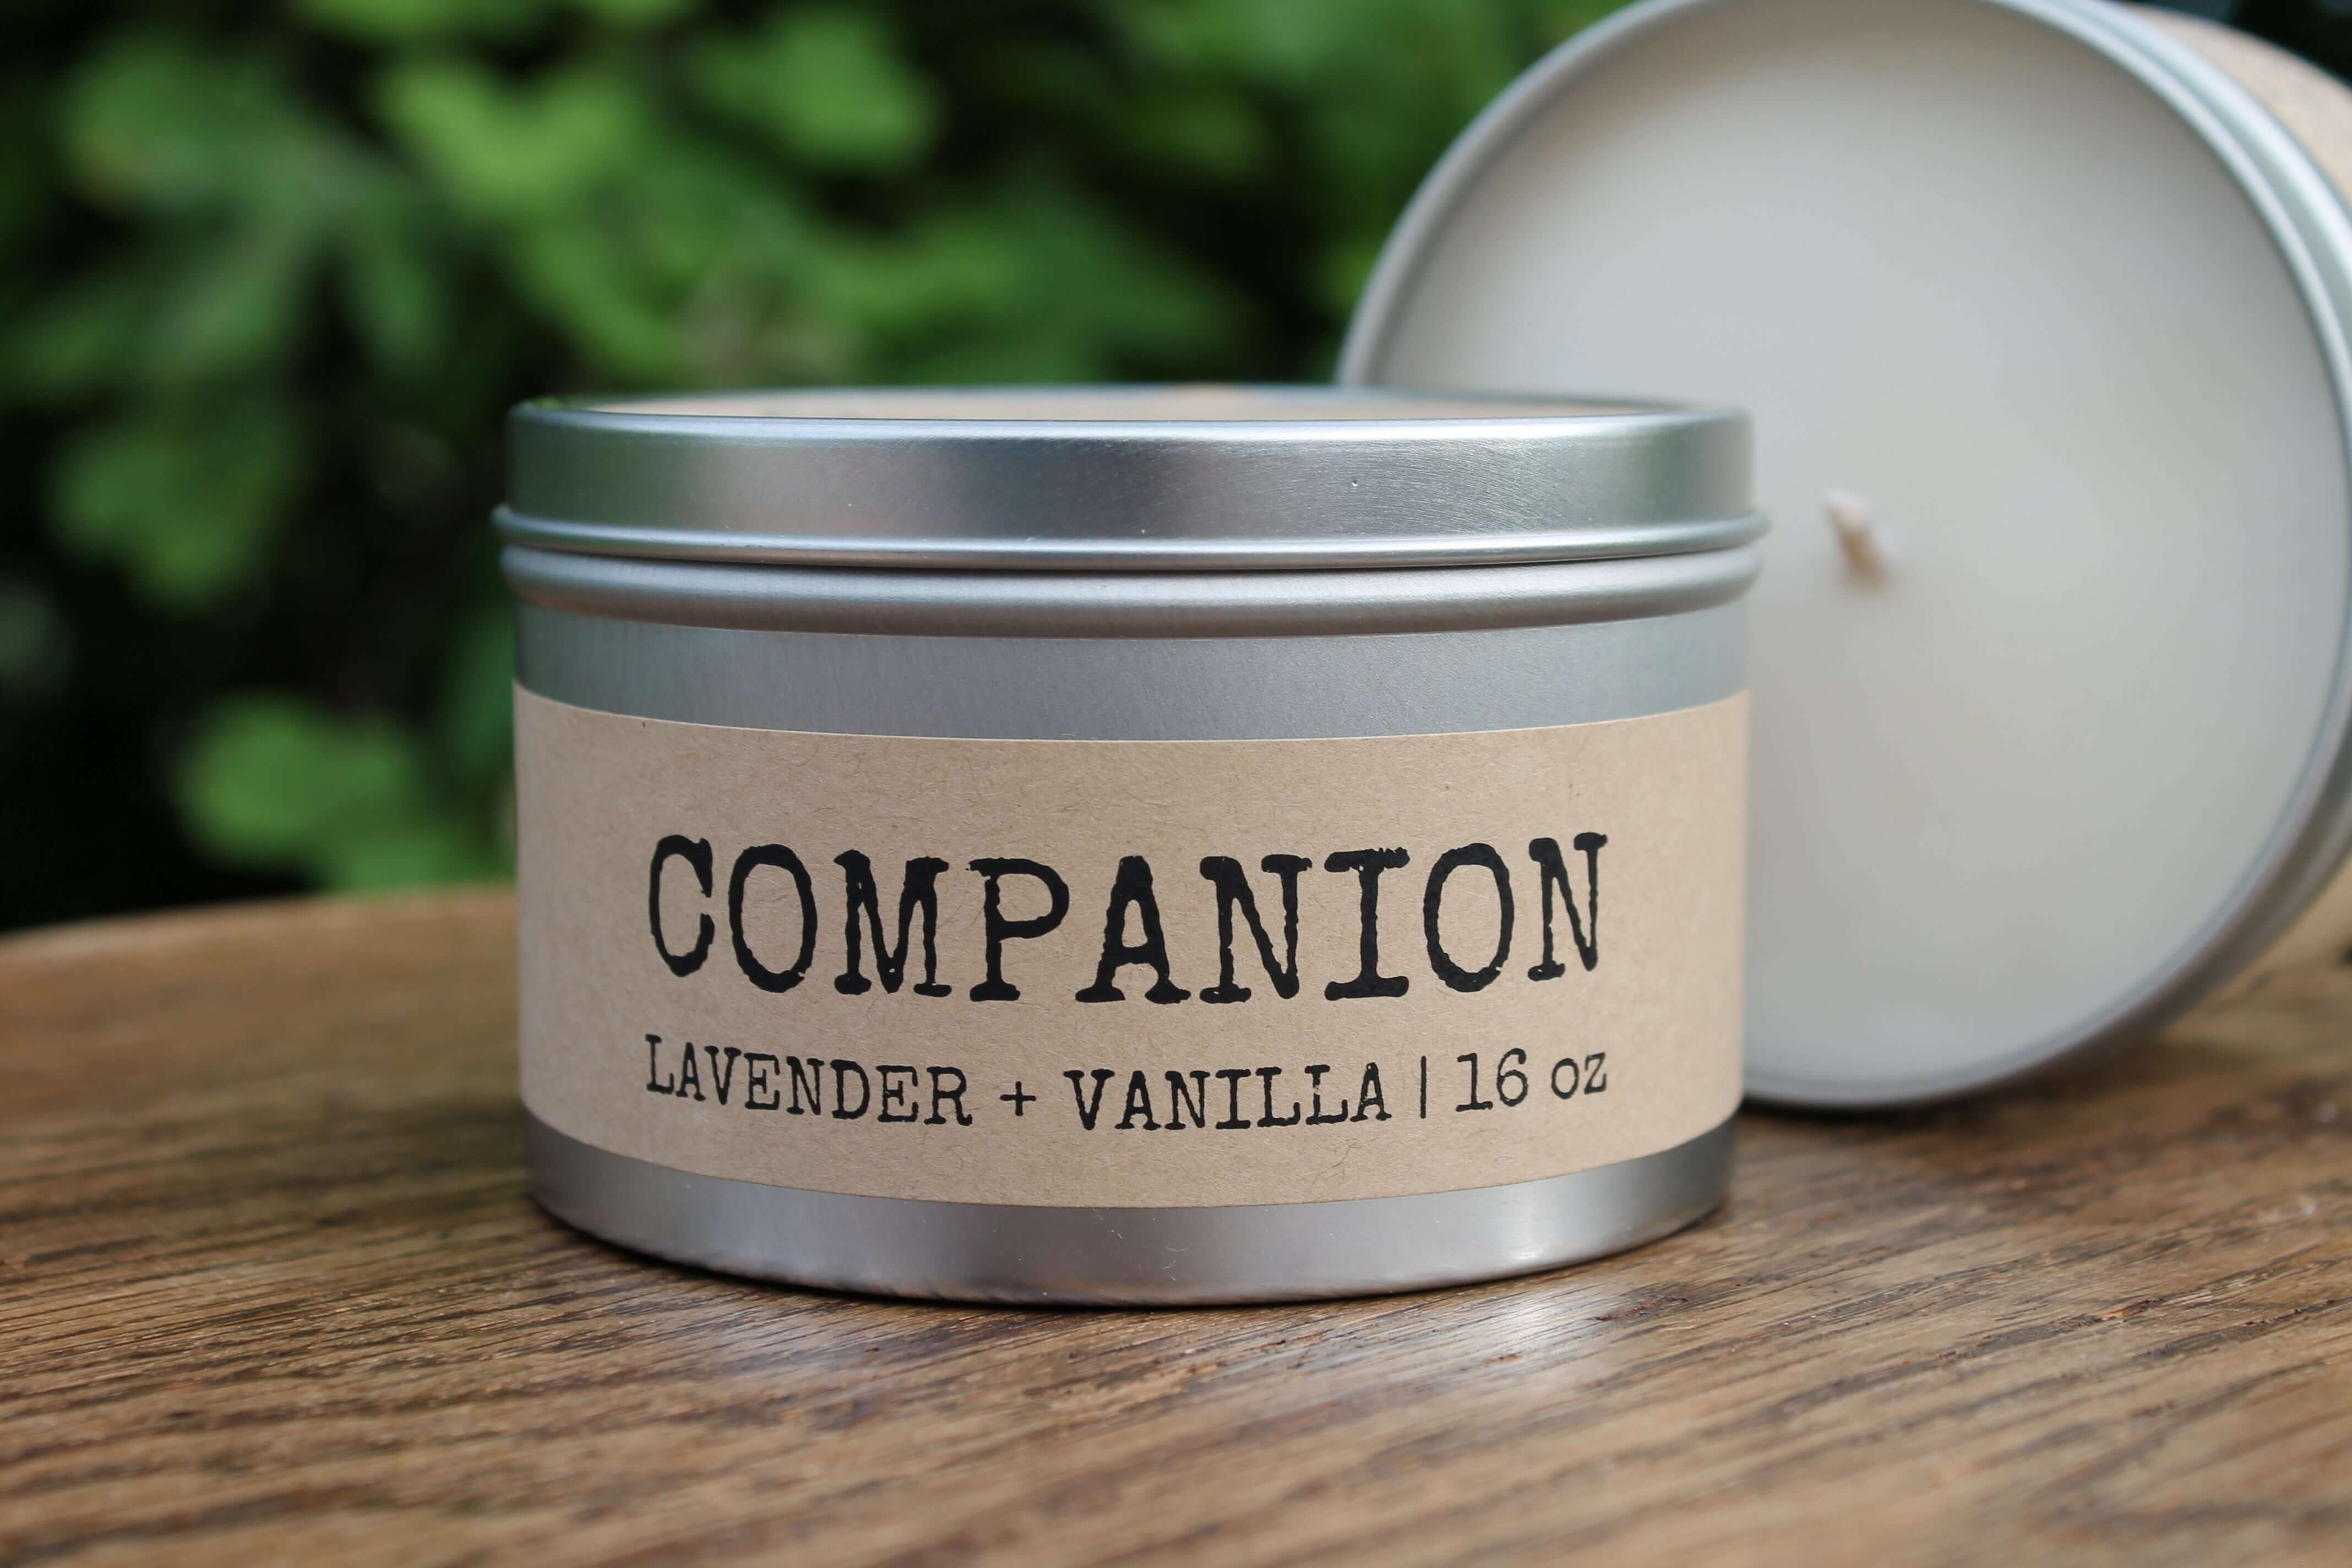 refillable soy candle, companies that donate to non-profits, companion soy candle, lavender soy candle, vanilla soy candle, companion 16 oz candle, long lasting candles, candles with a strong throw